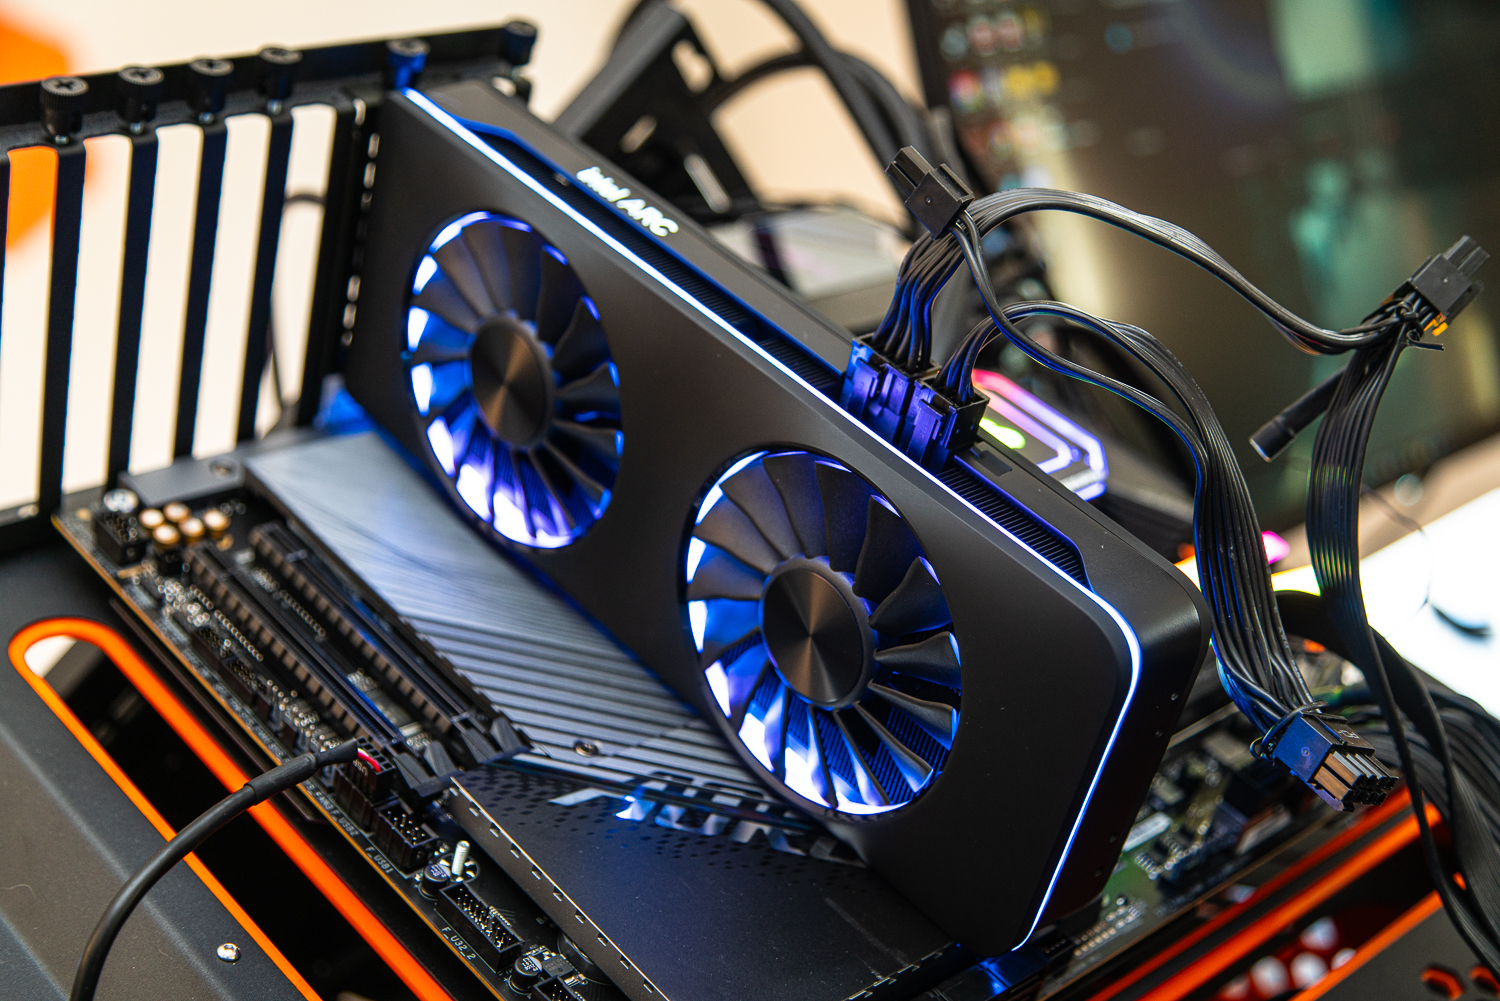 Intel Arc graphics cards: 7 vital details you need to know